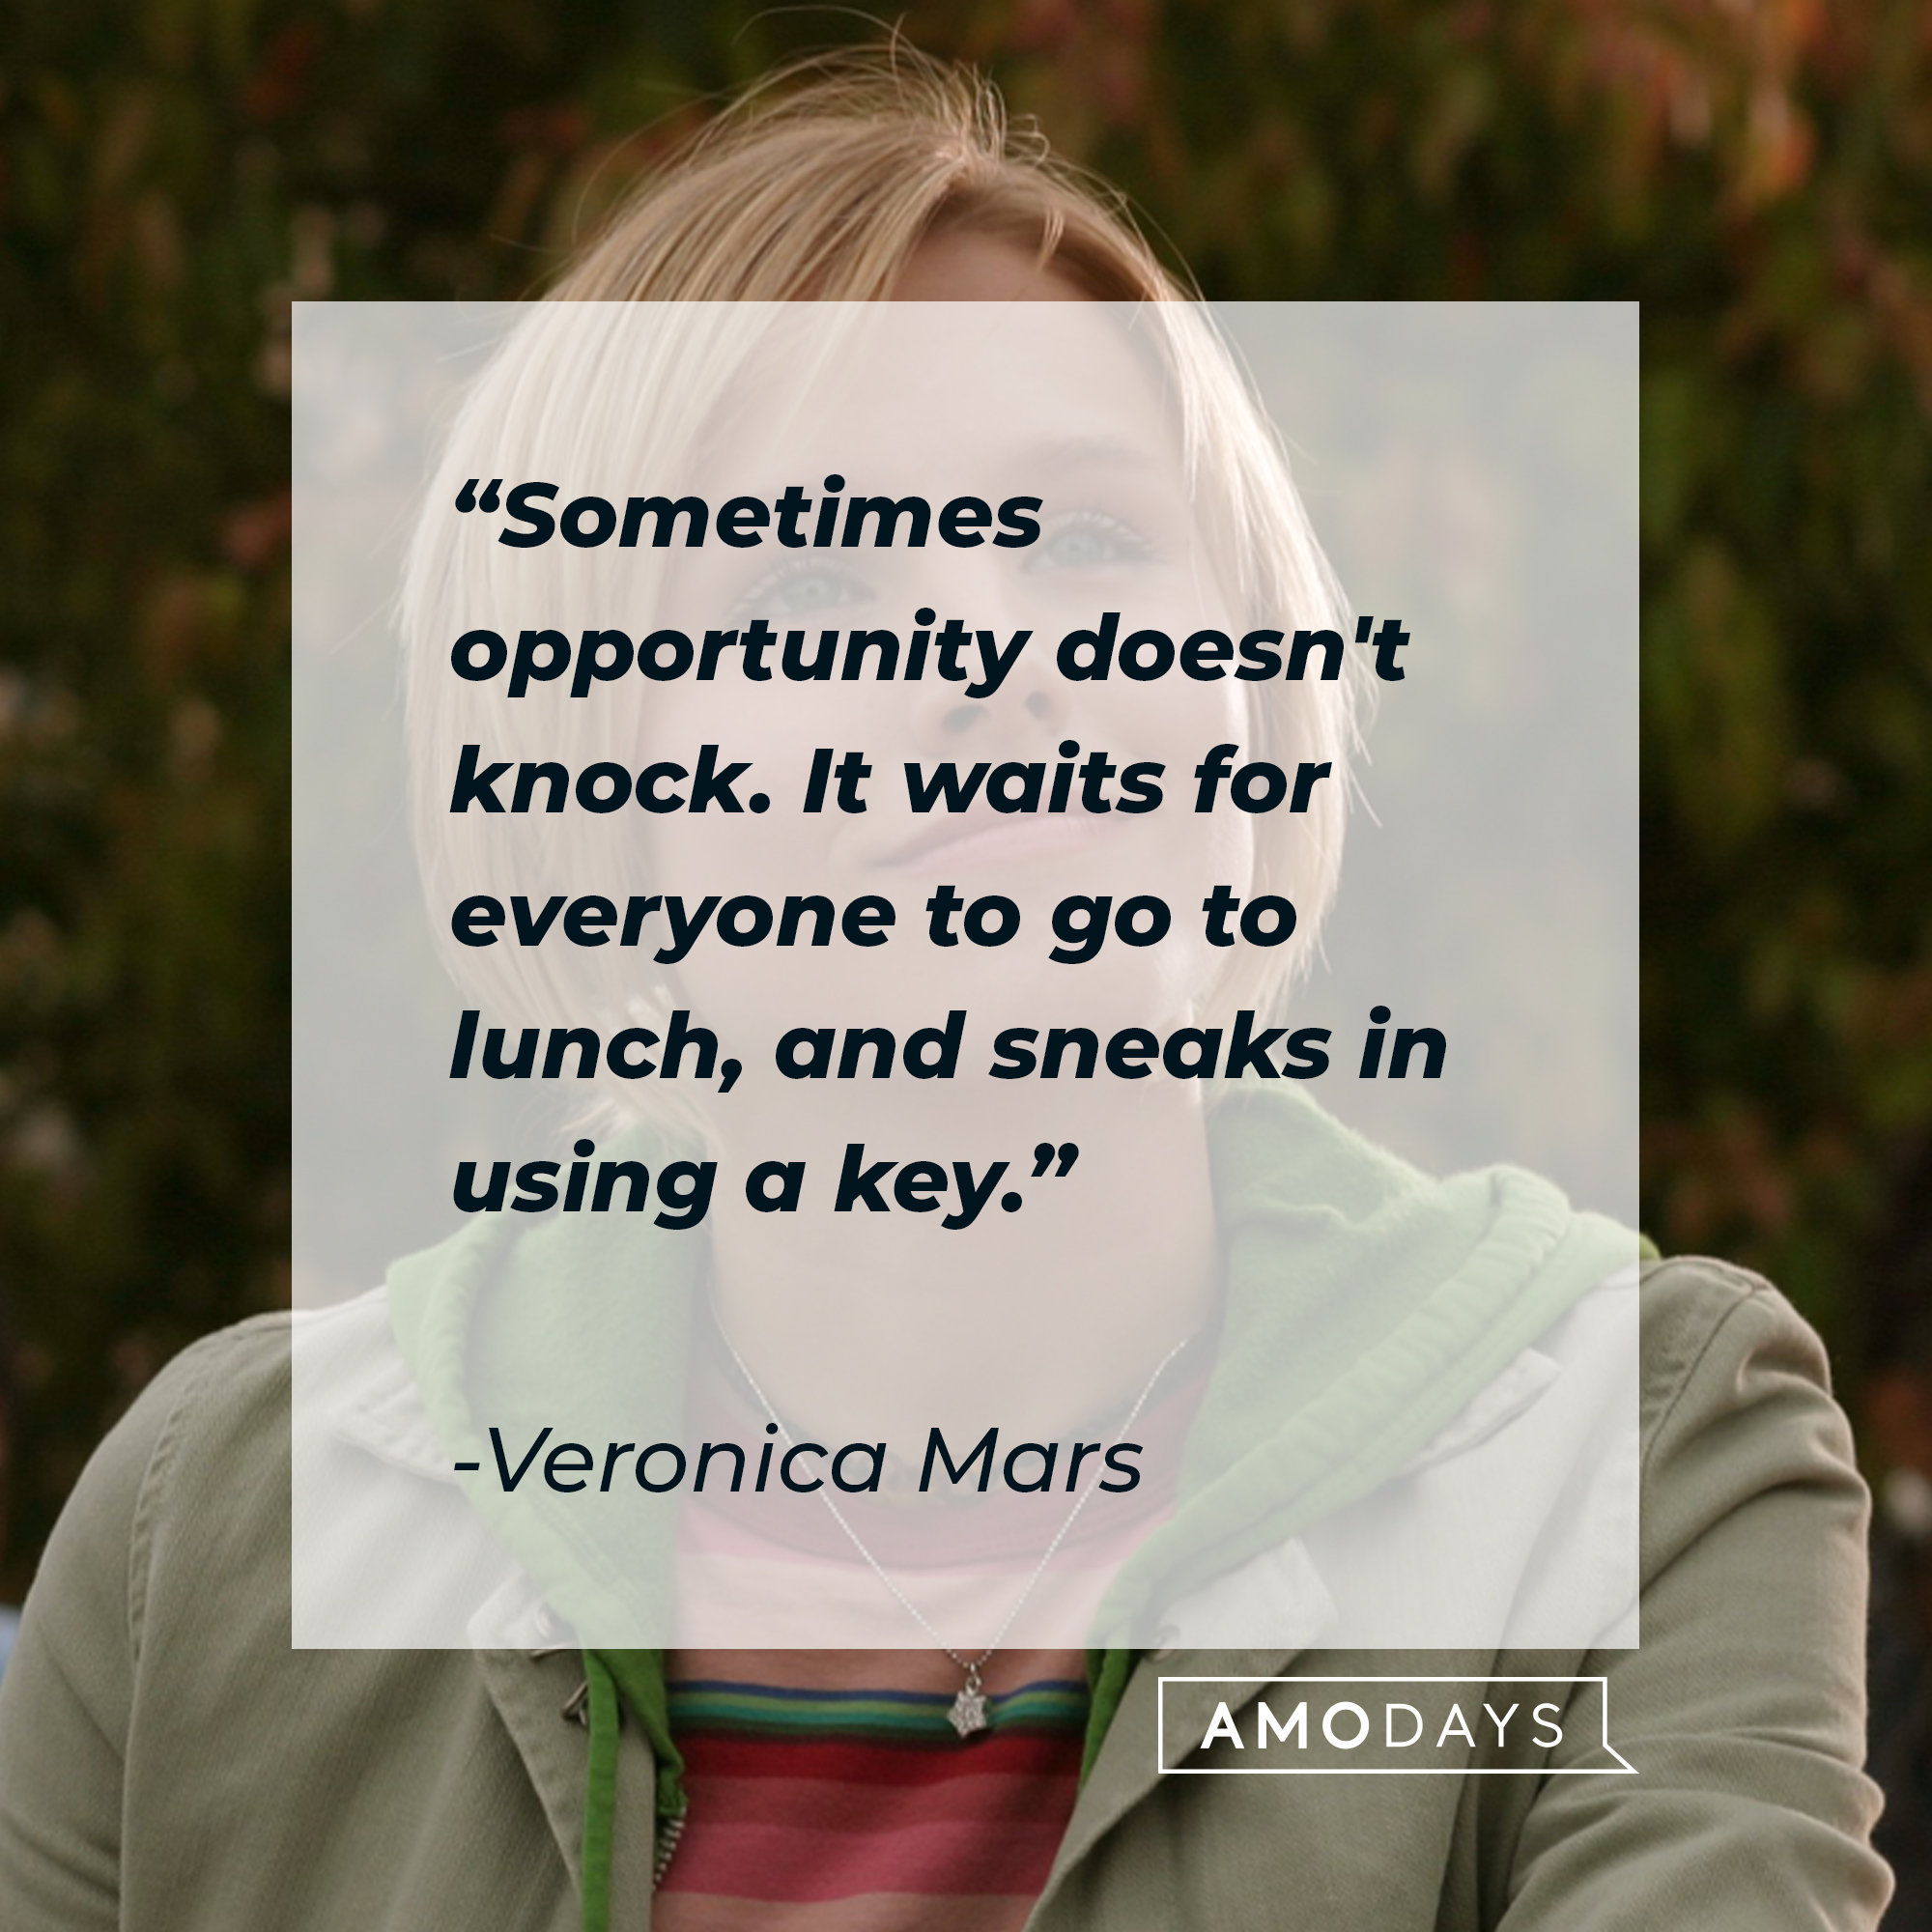 Veronica Mars' quote: "Sometimes opportunity doesn't knock. It waits for everyone to go to lunch, and sneaks in using a key." | Source: facebook.com/VeronicaMars